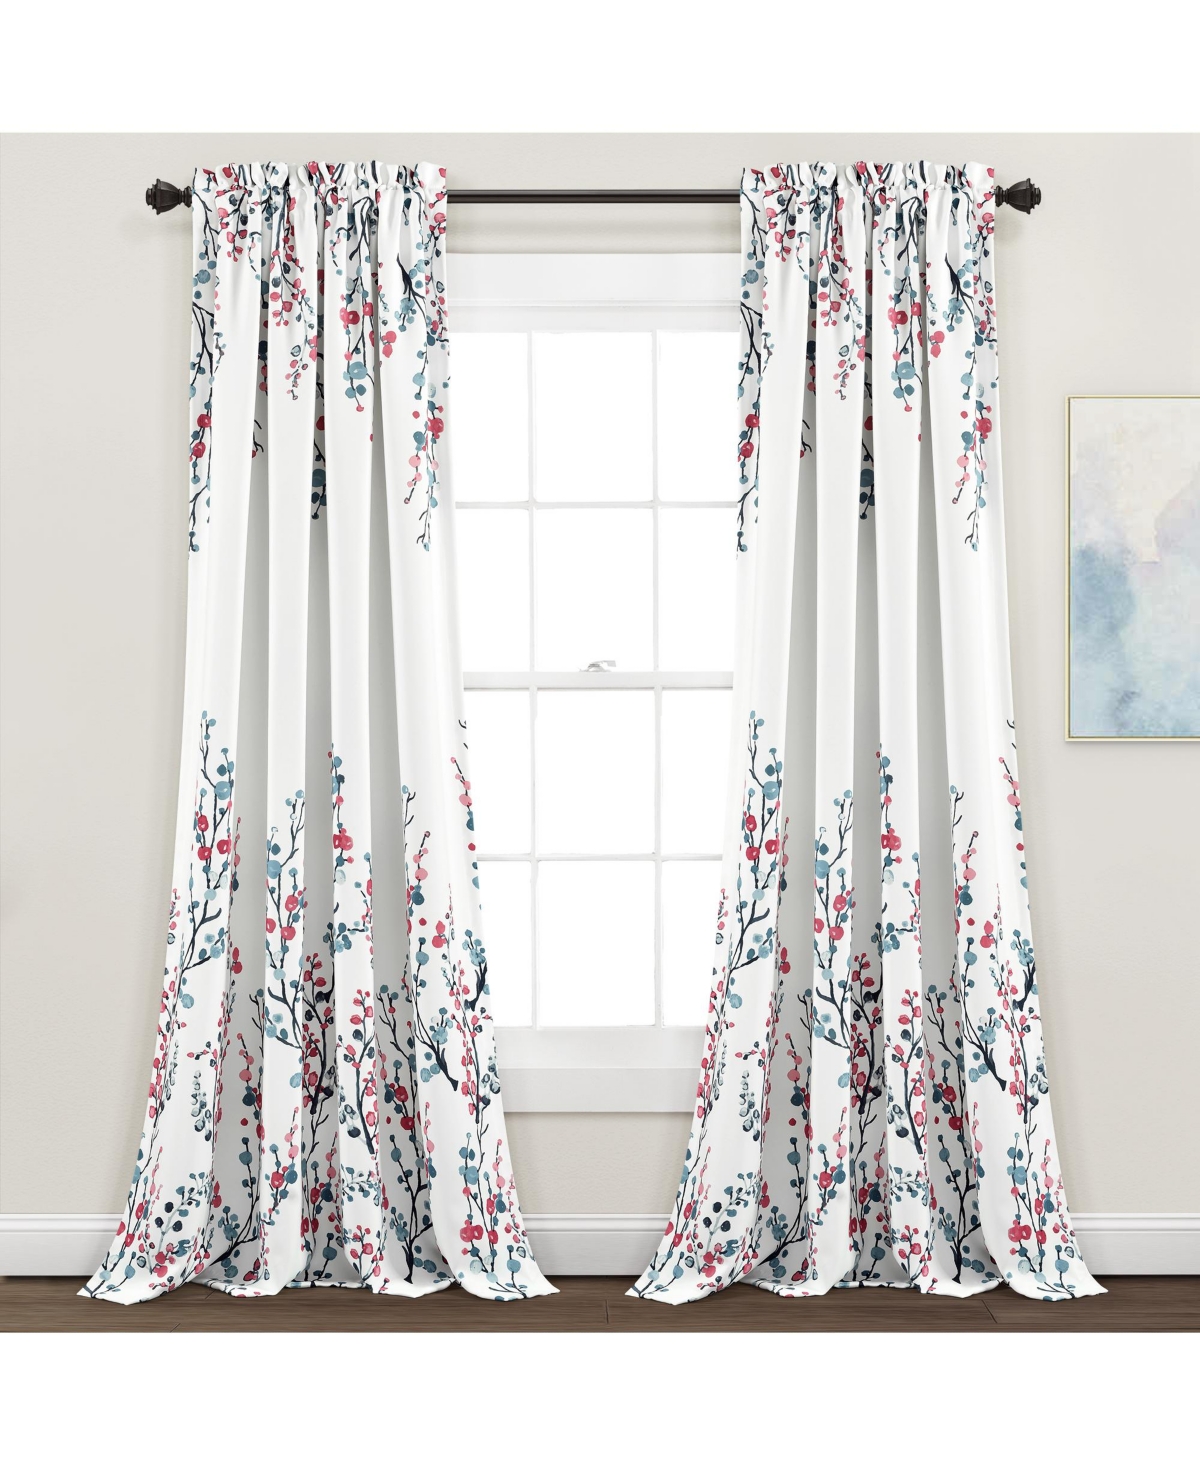 Mirabelle Watercolor Floral Light Filtering Window Curtain Panels Blue/Coral 52x95+2 Set - Blue